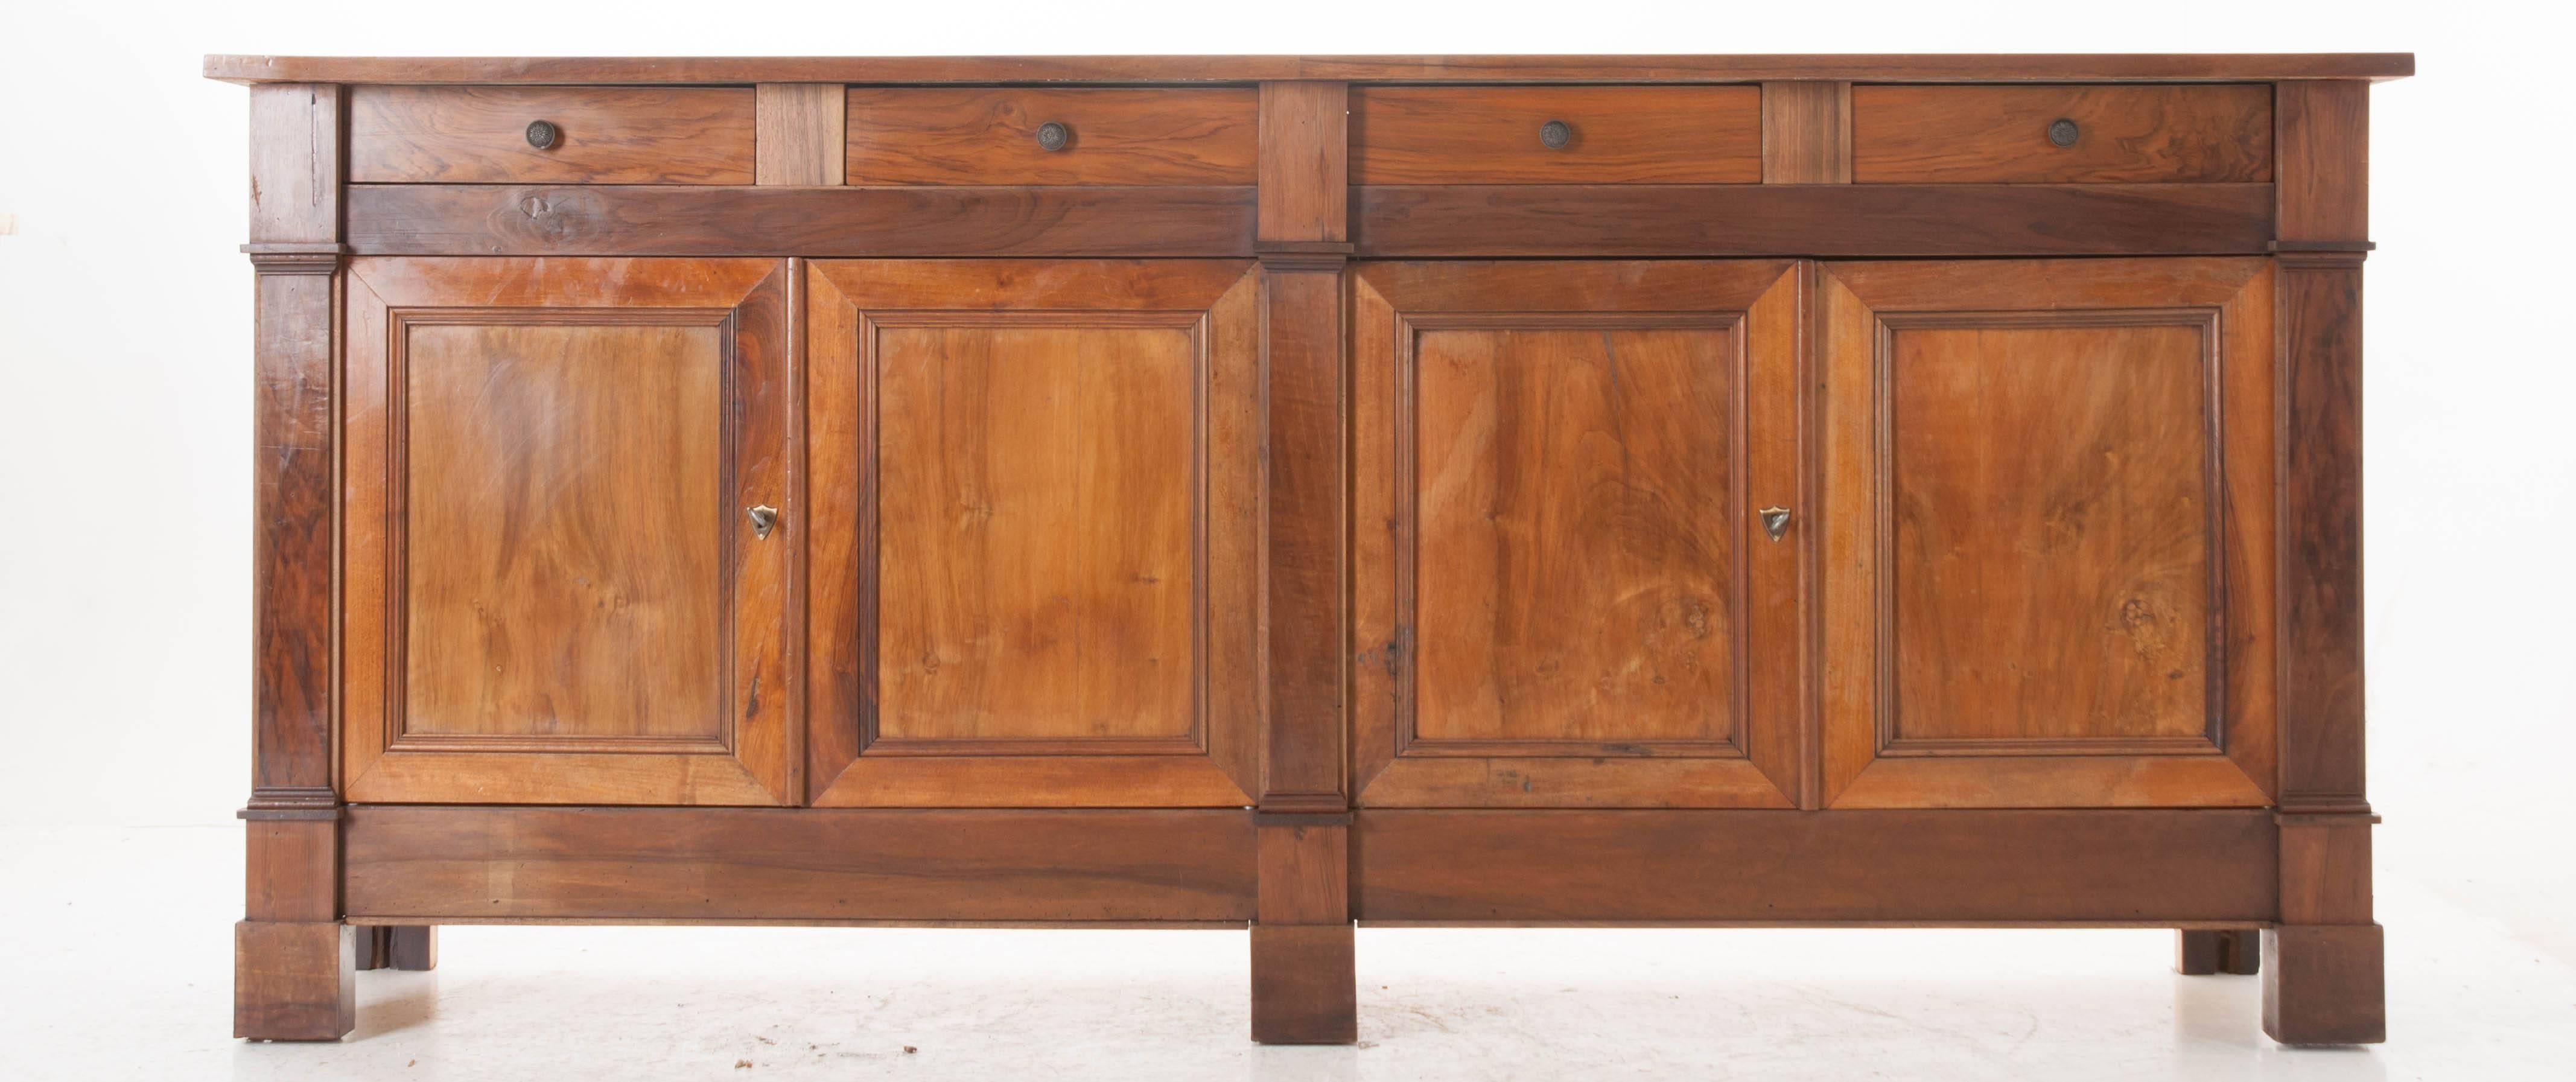 This Louis Philippe enfilade has been newly constructed, in France, using wood that dates back to the 19th century. New life has been breathed into the antique walnut, as it has been rejuvenated with a fresh coat of wax and careful polishing. Four